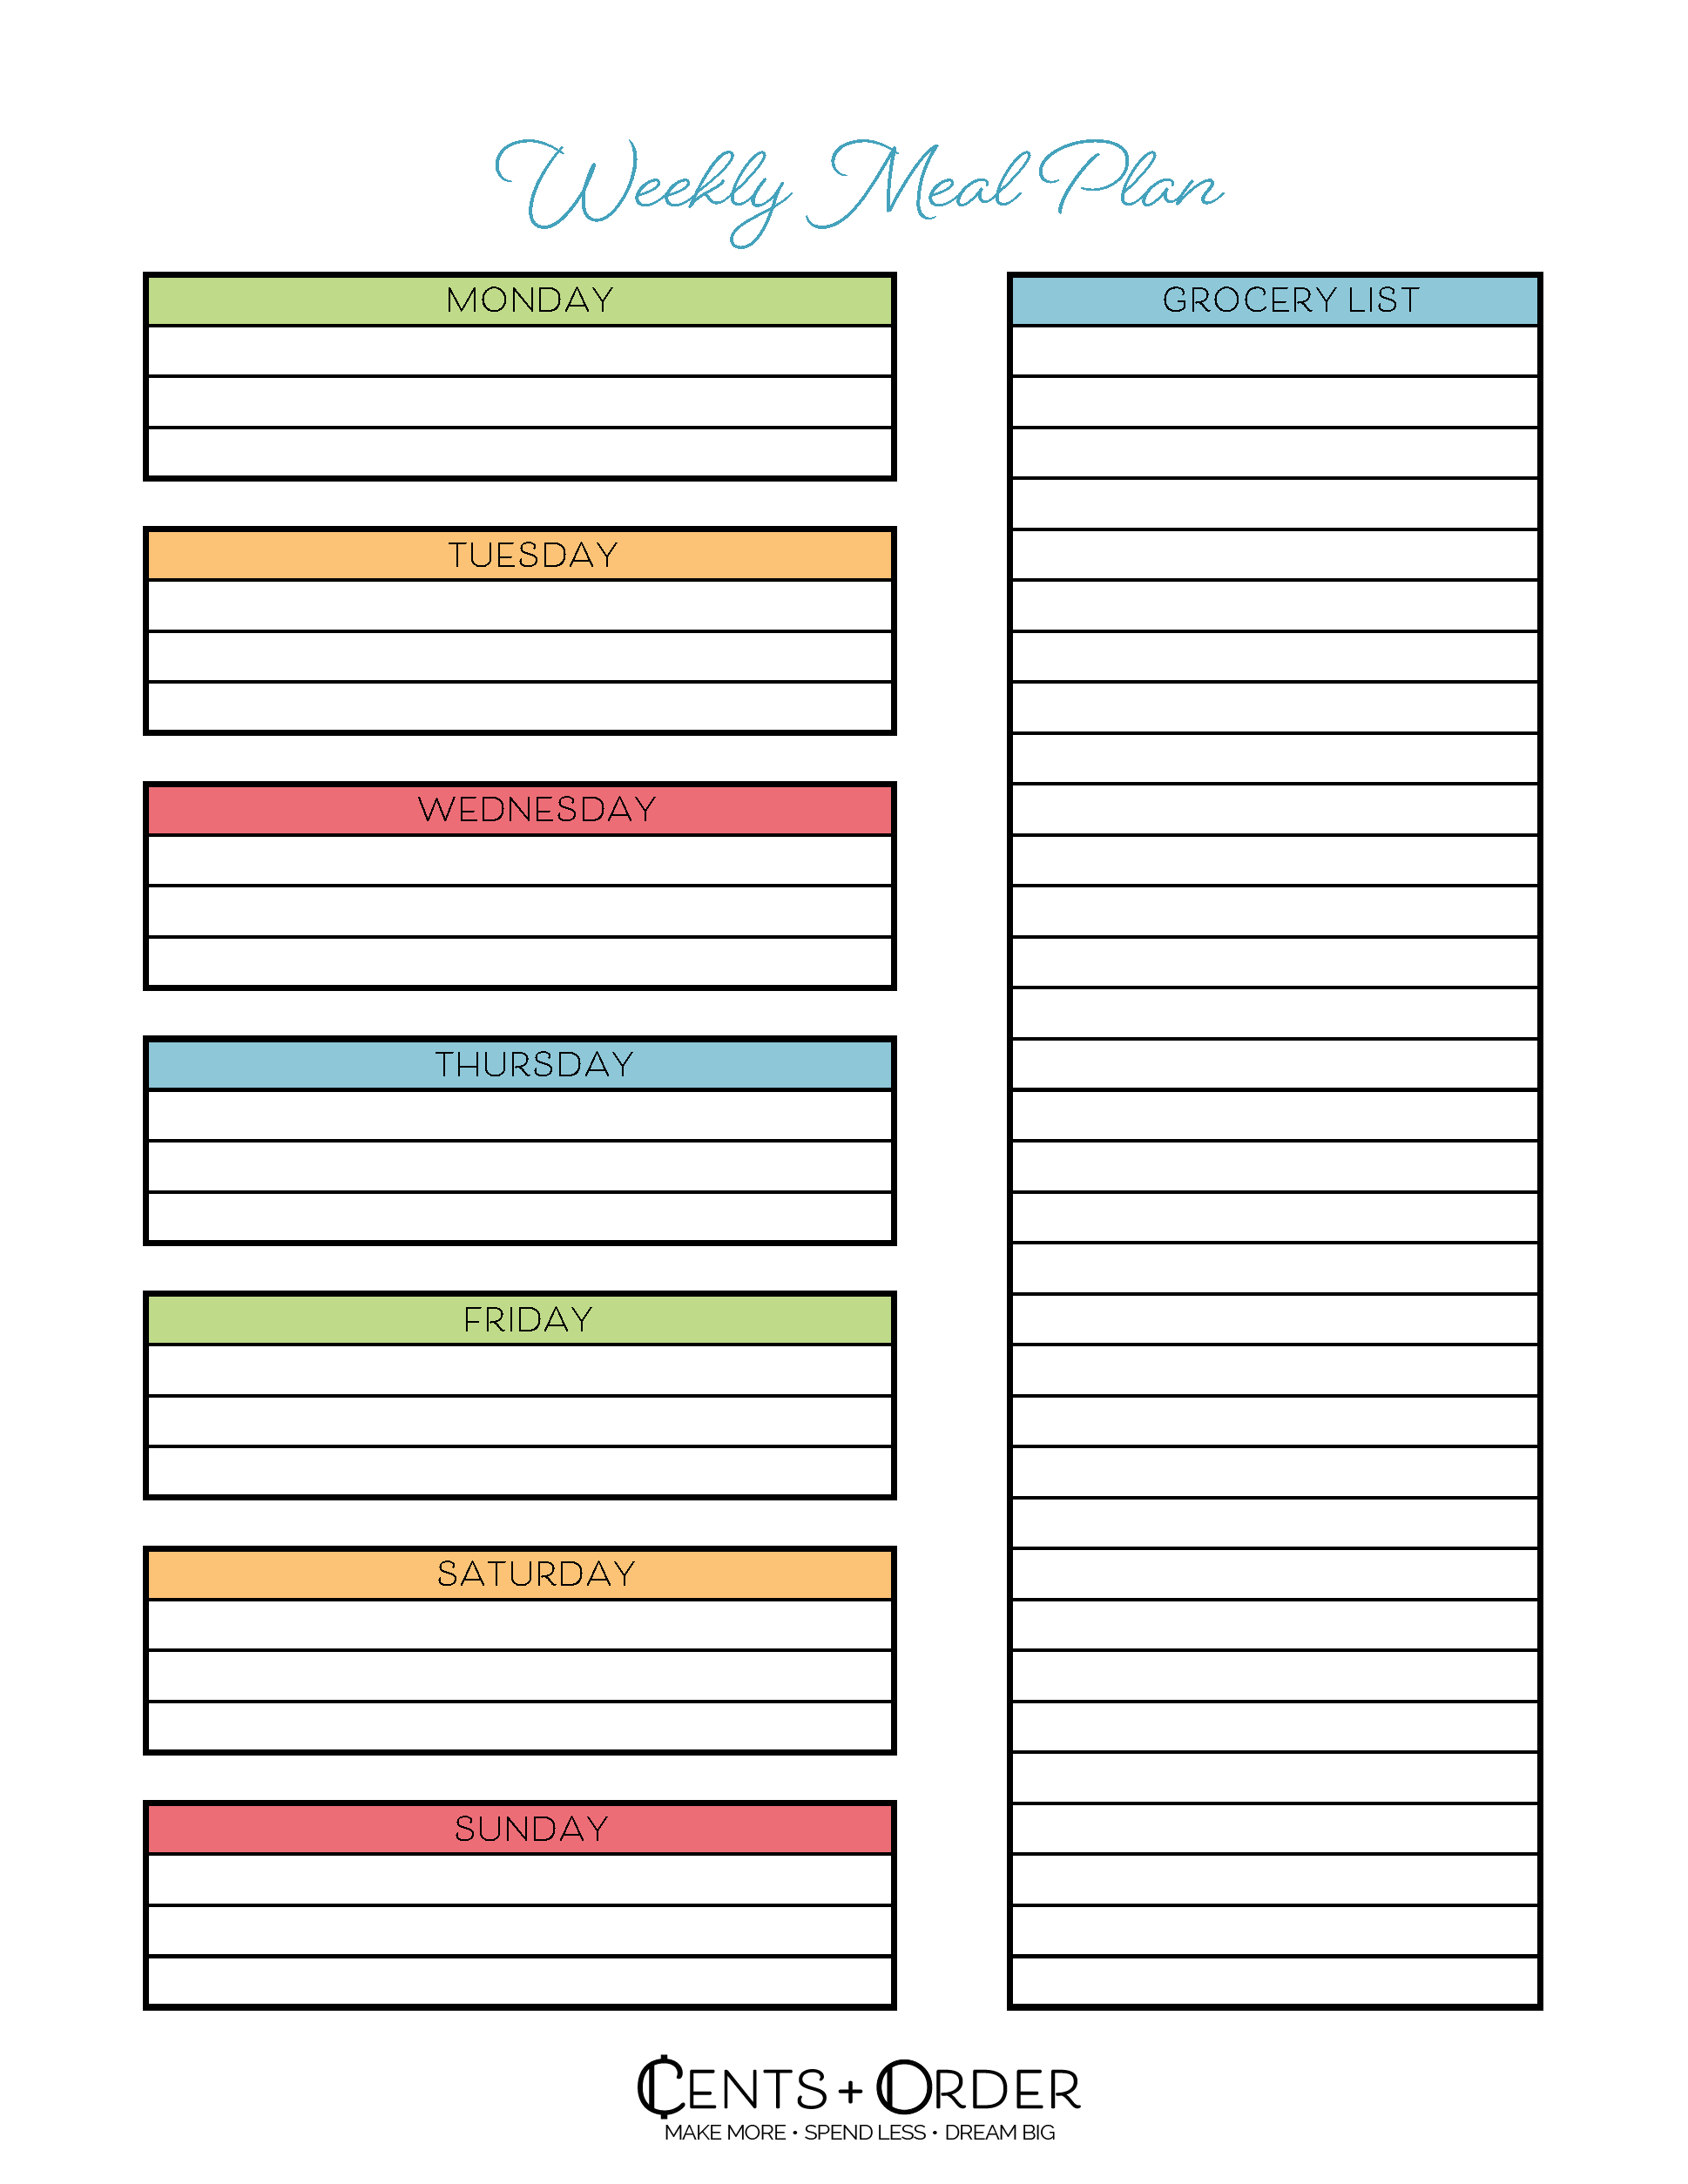 Free Weekly Meal Planning Printable With Grocery List Pertaining To Menu Planner With Grocery List Template